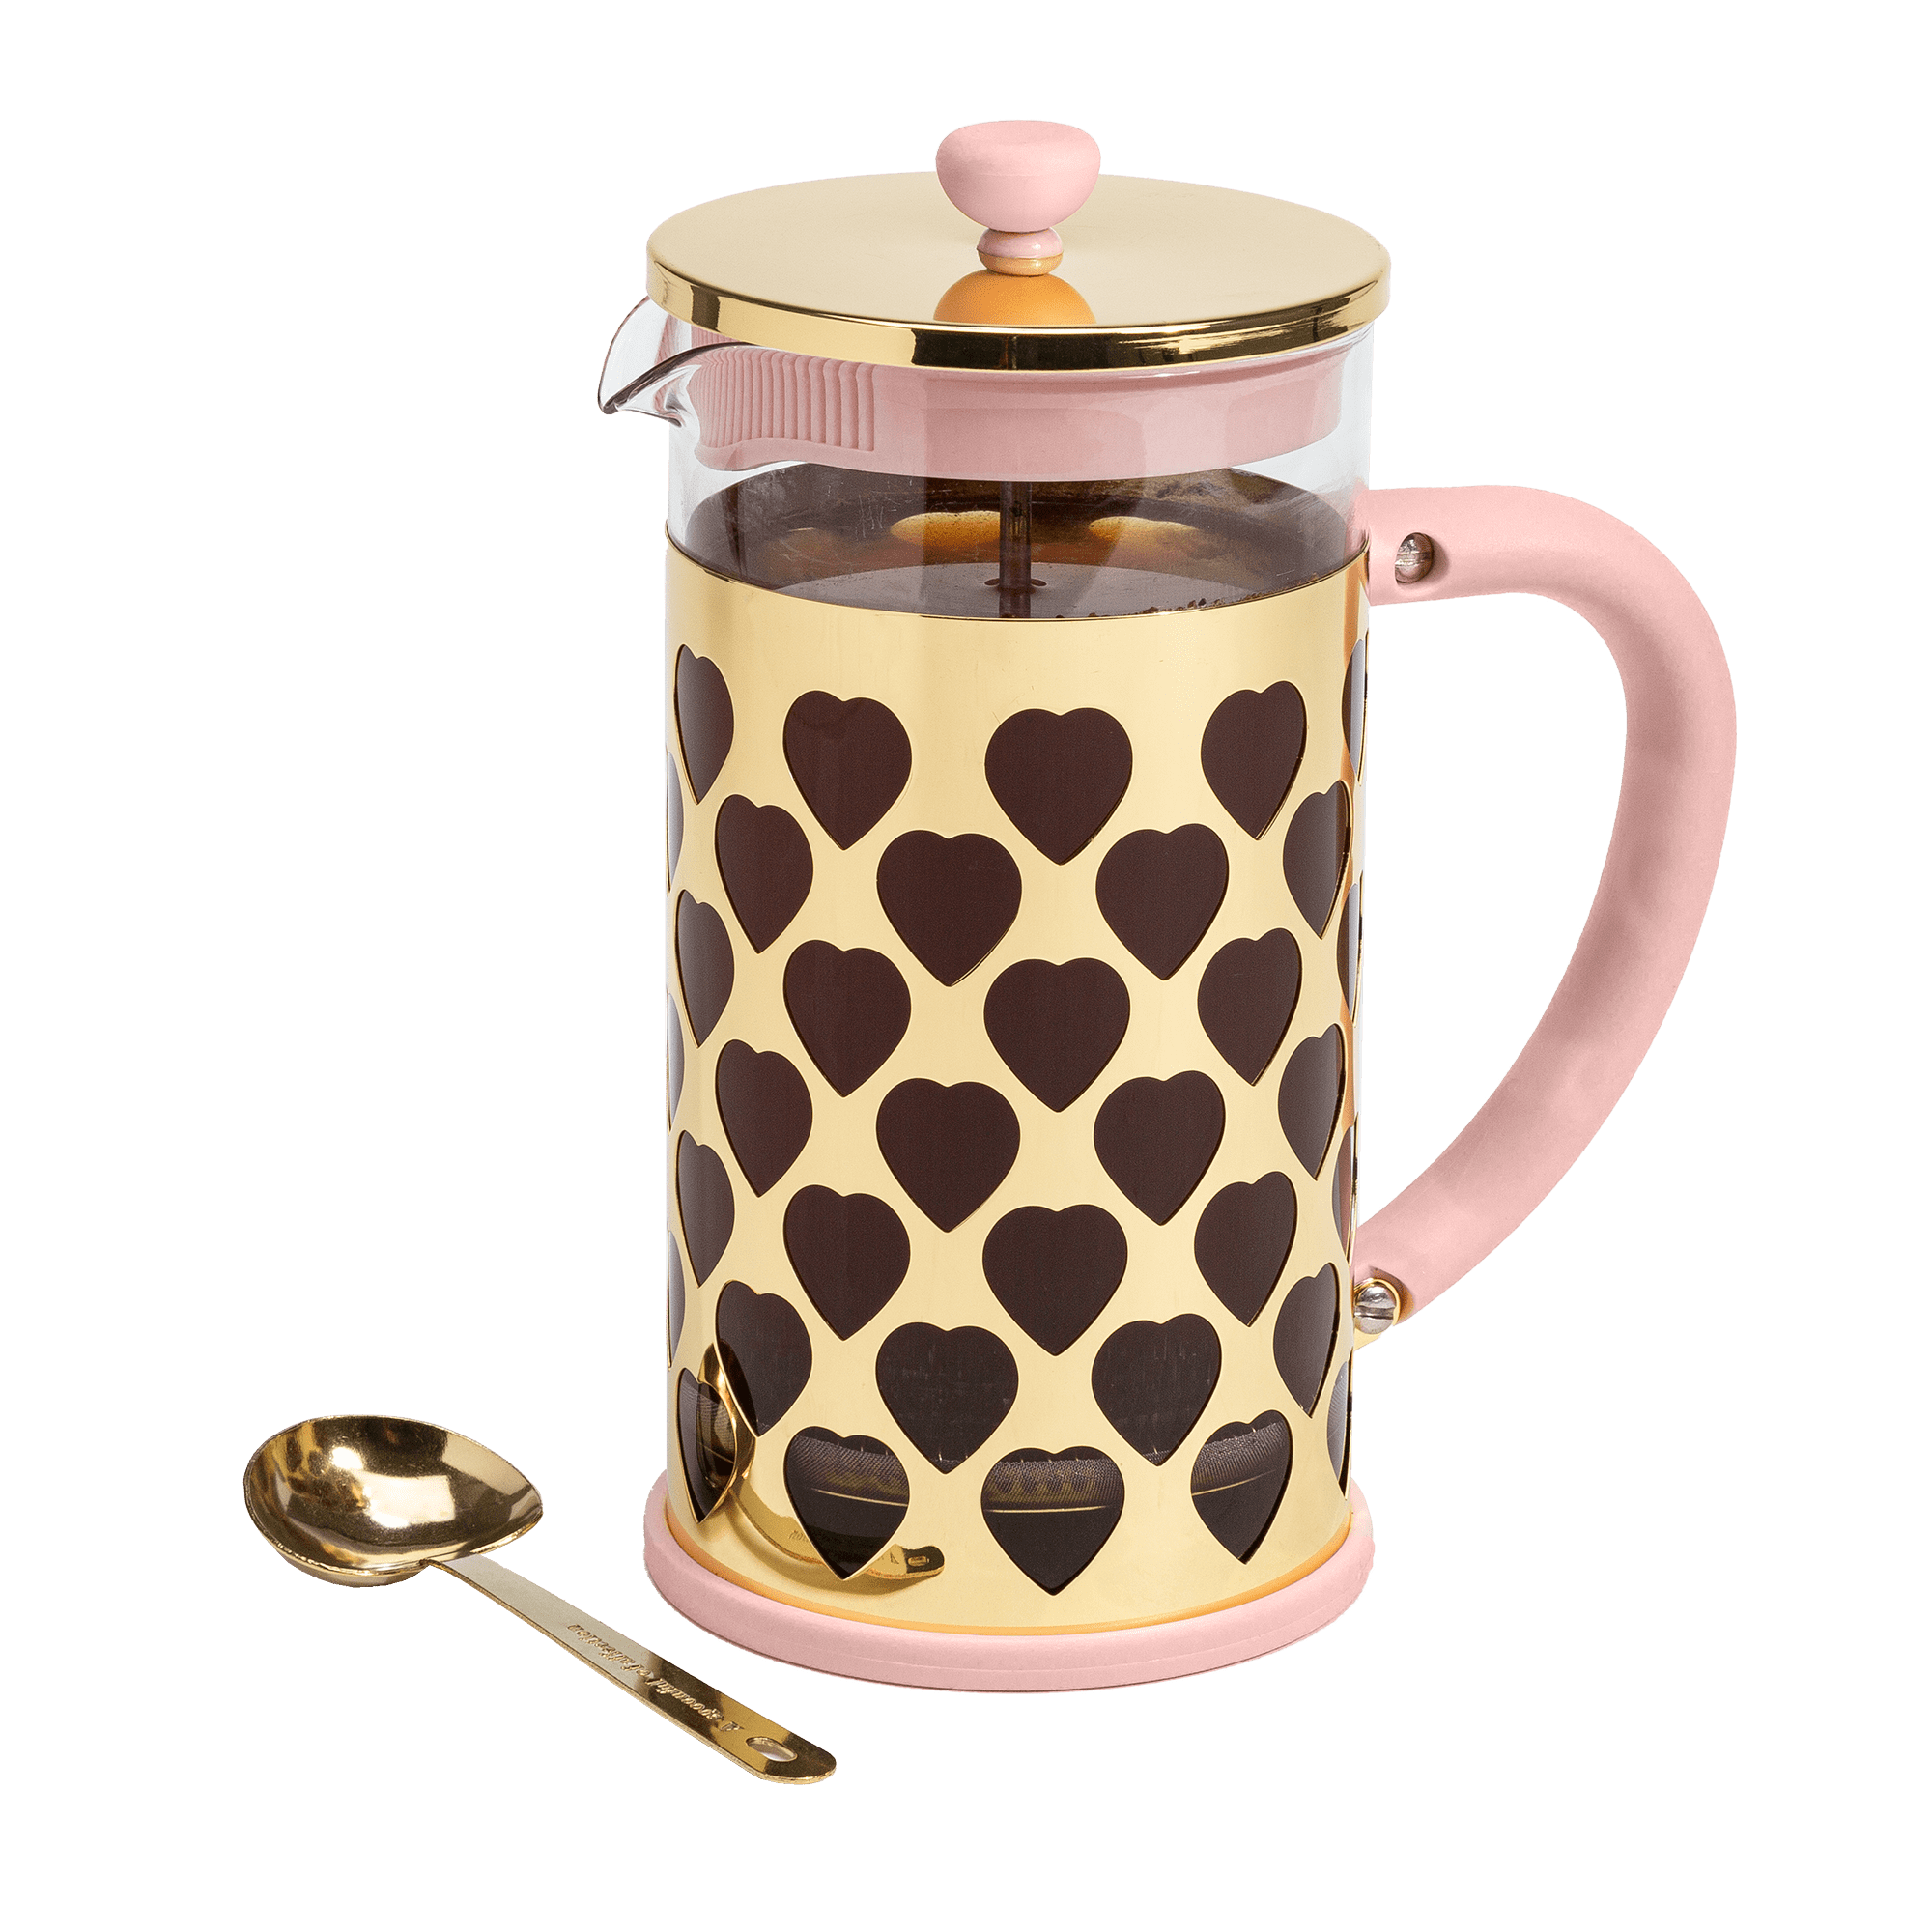 Paris Hilton French Press Coffee Maker with Heart Shaped Measuring Scoop, 34 Ounce, Pink, Size: 8-Cup